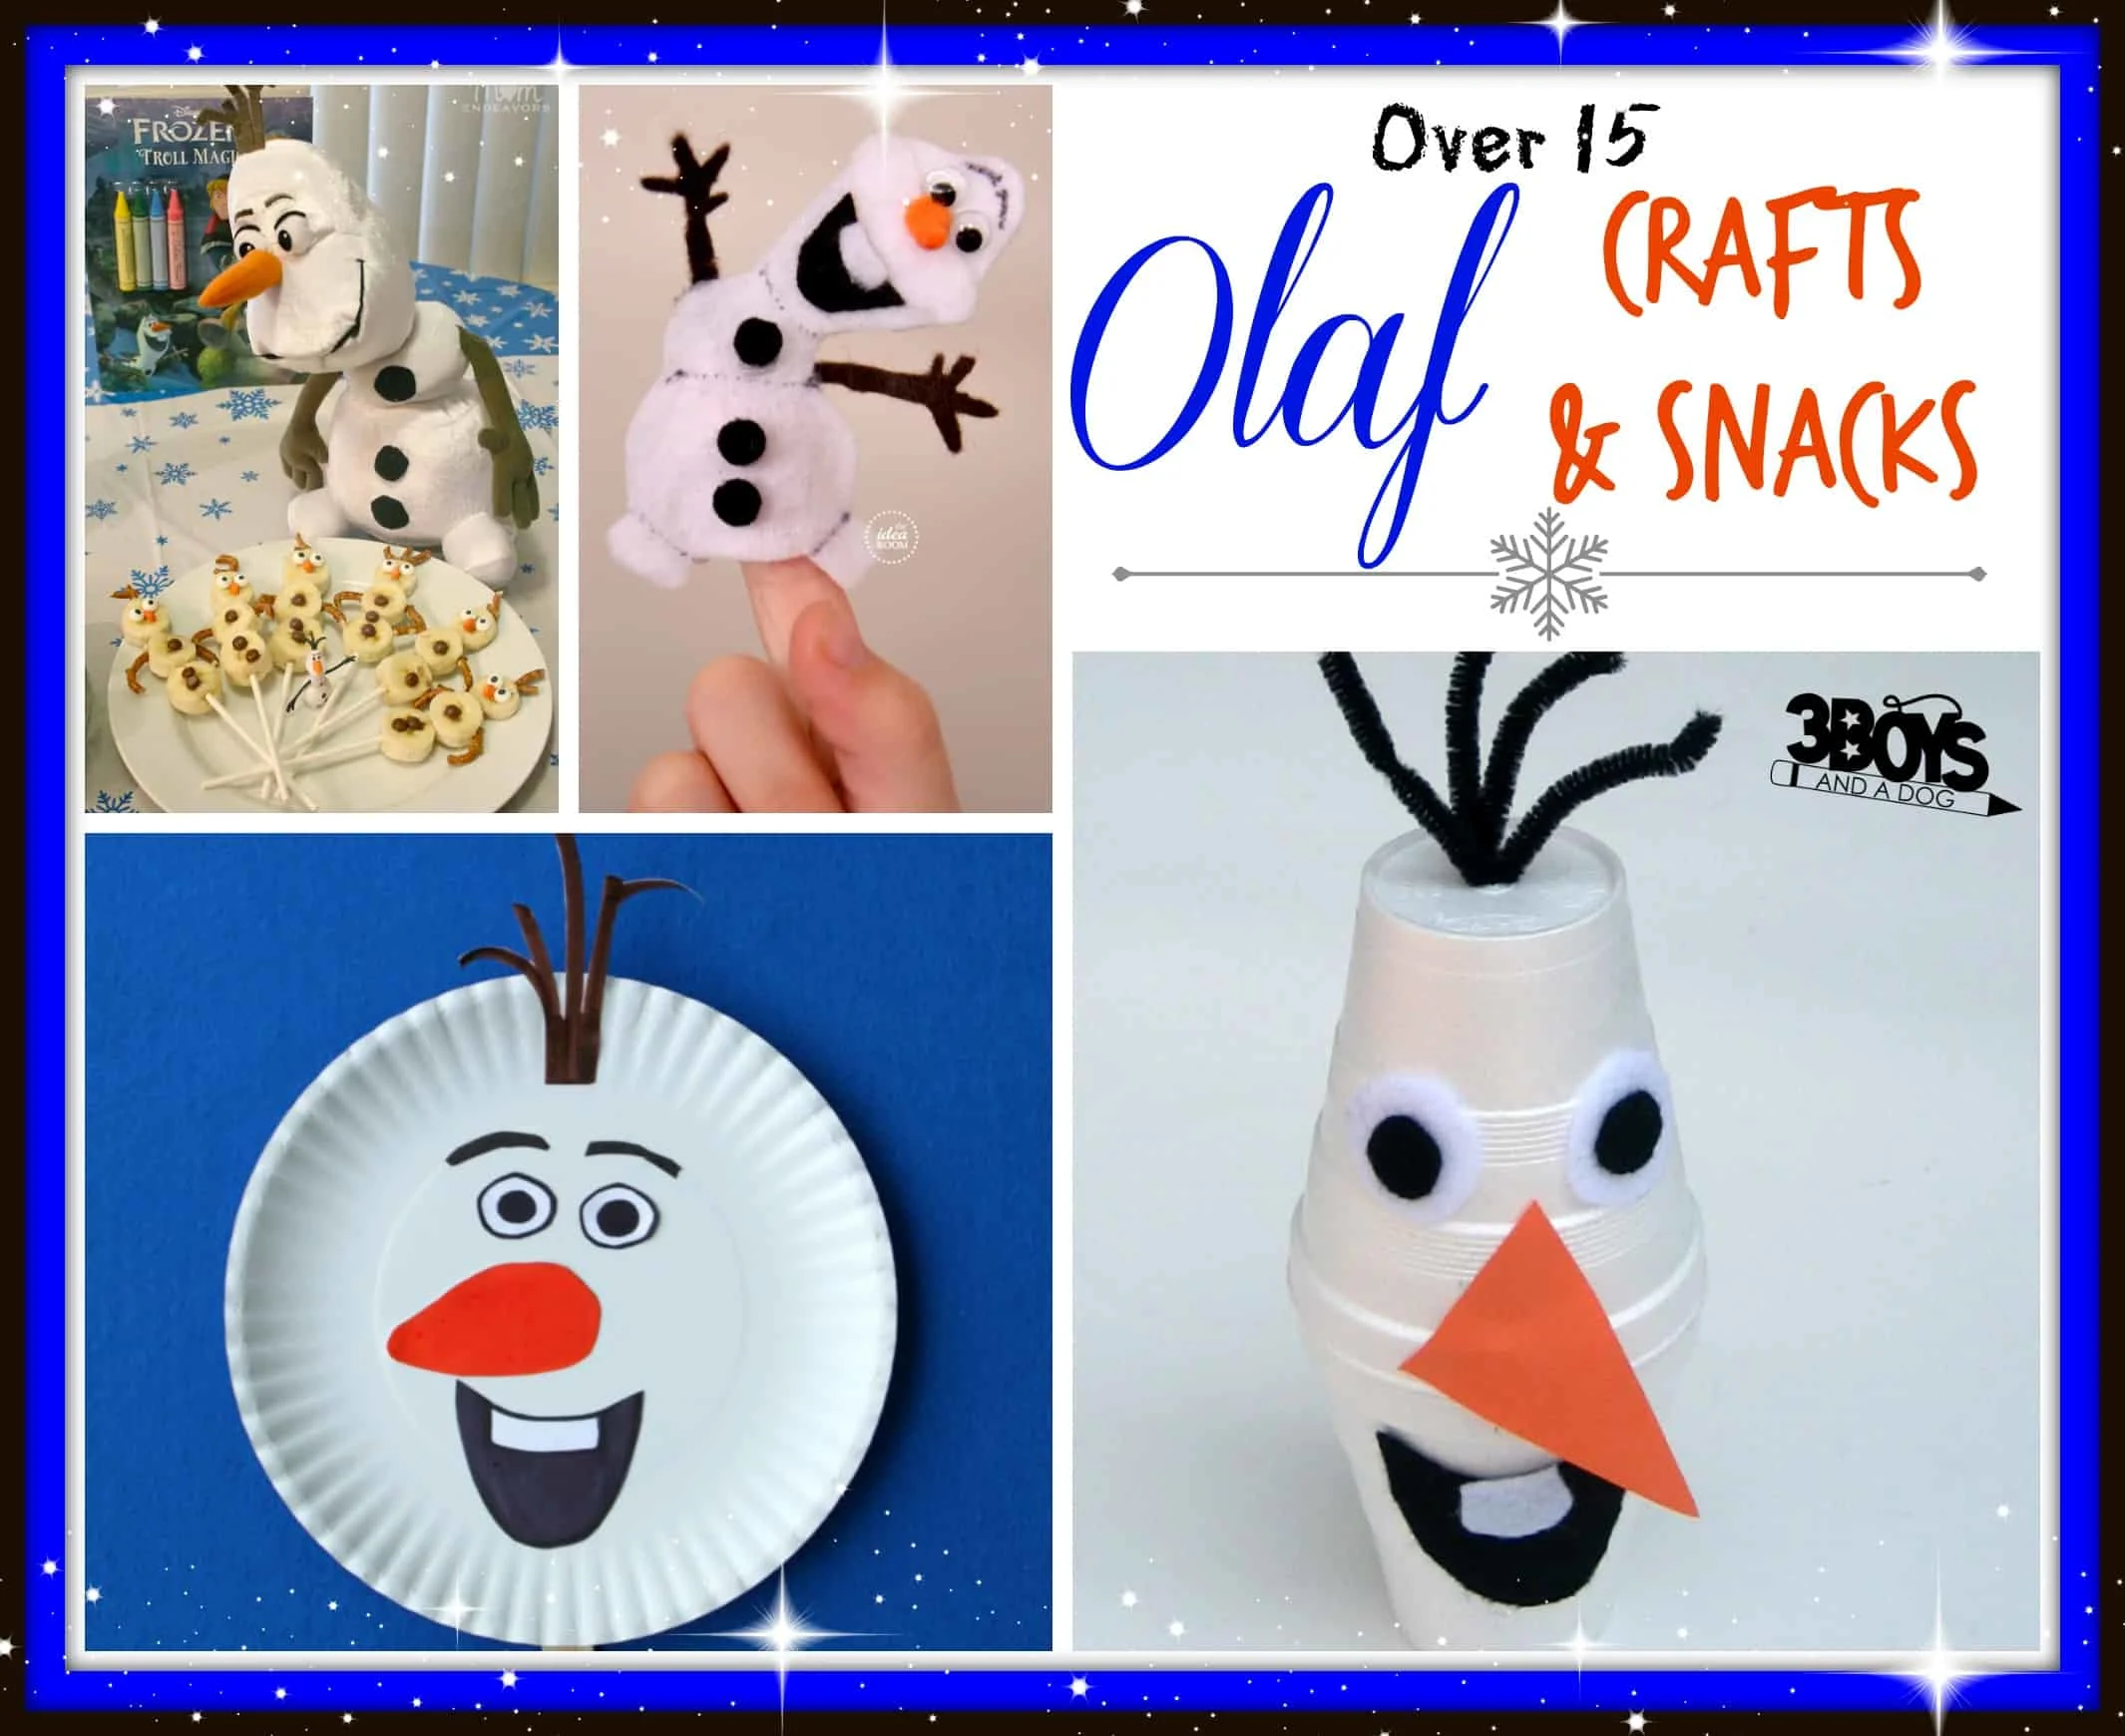 olaf crafts and snacks